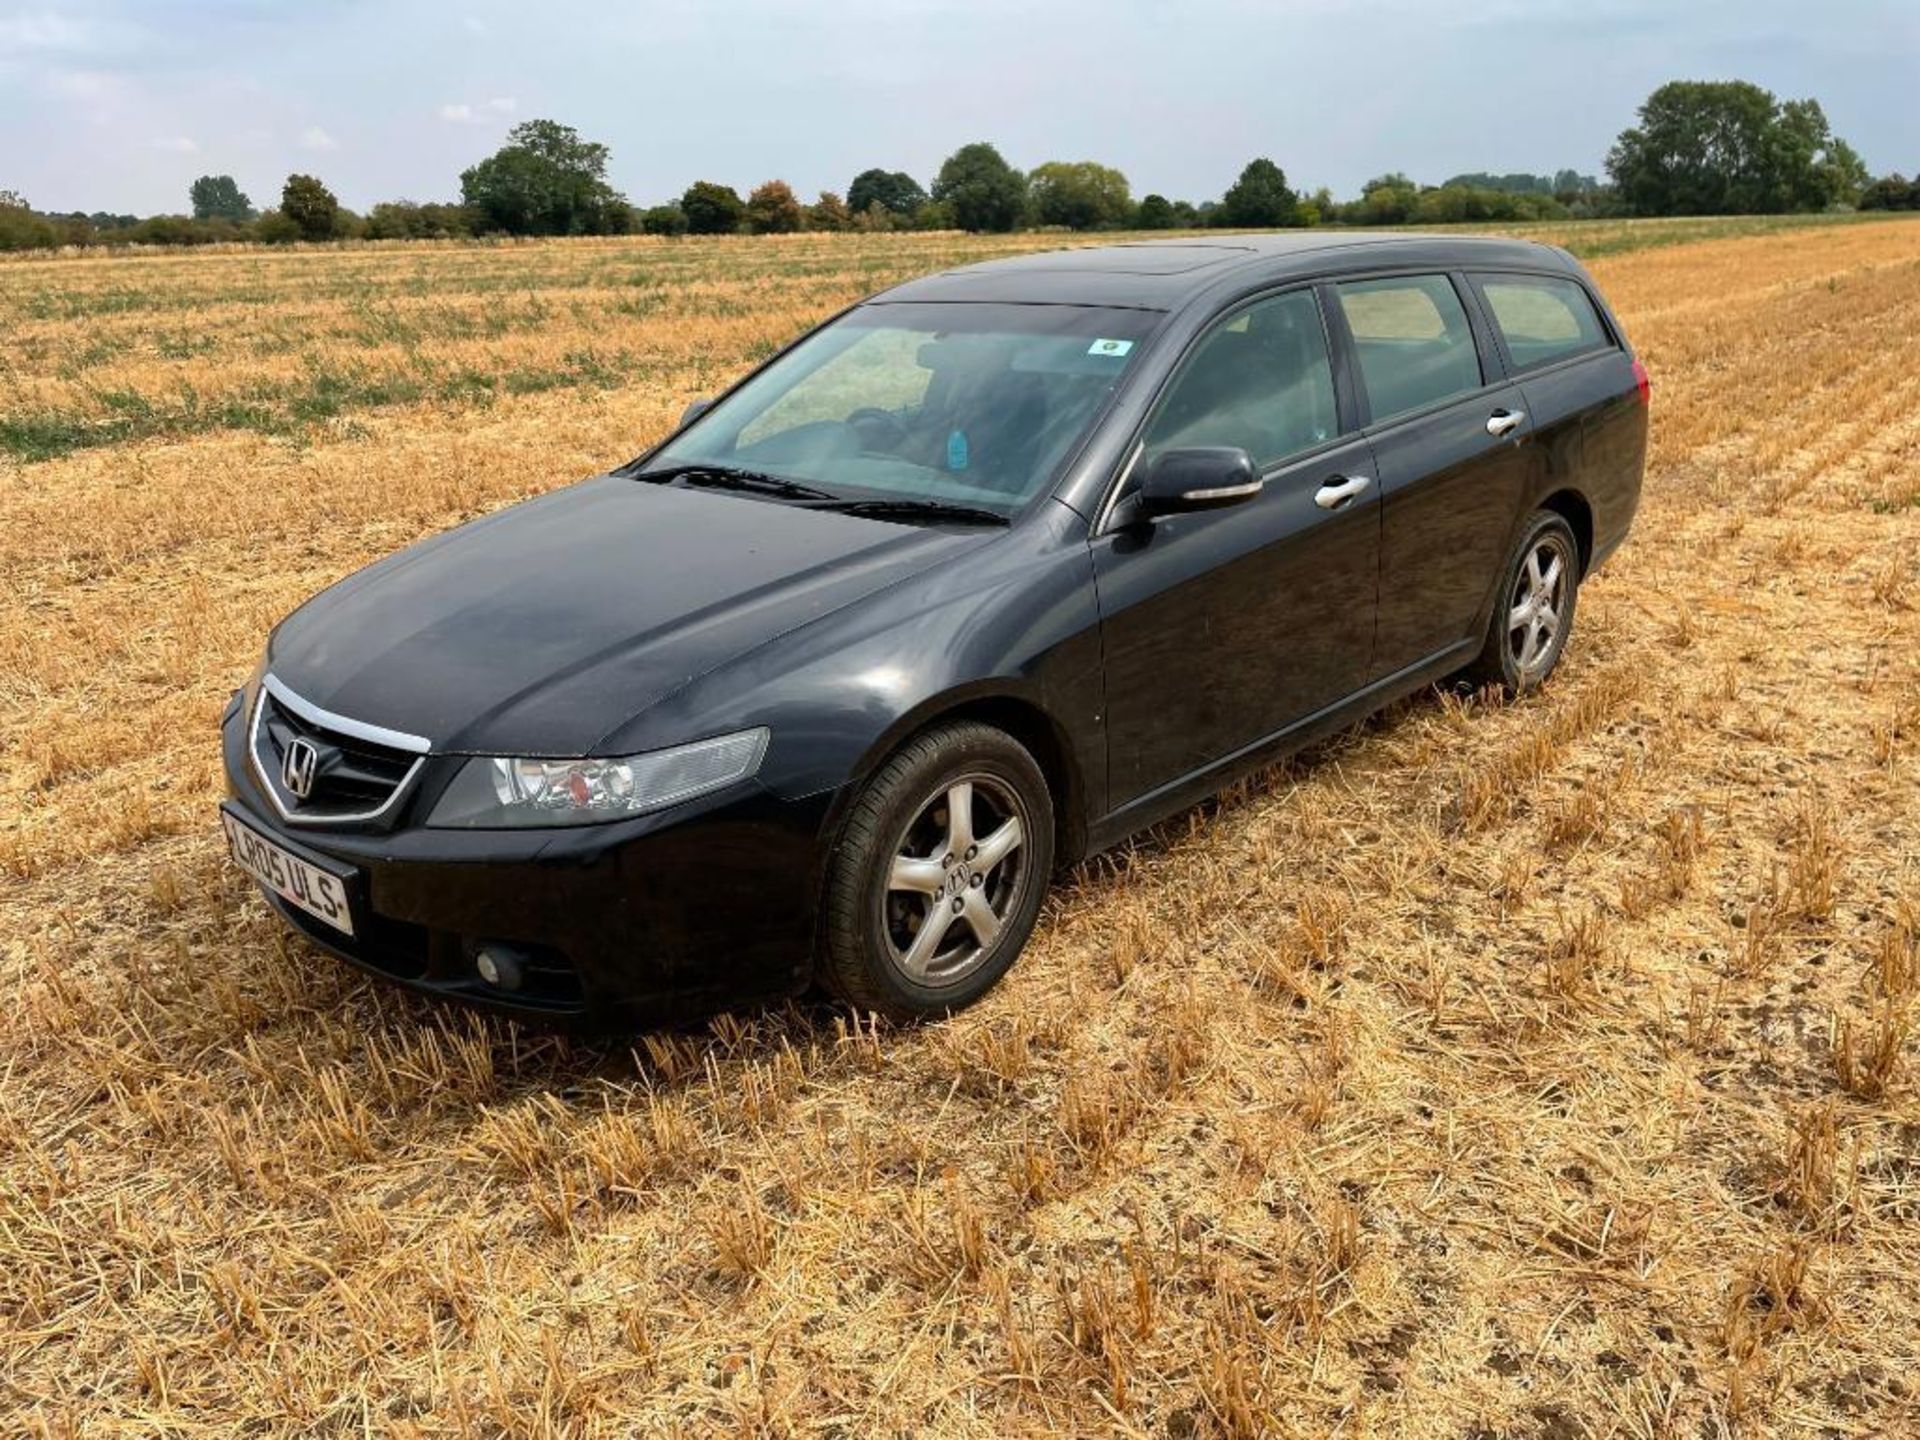 *2005 Honda Accord i-CTDi Tourer, 2.2 diesel engine, black, air con, sun roof, heated leather seats, - Image 9 of 13